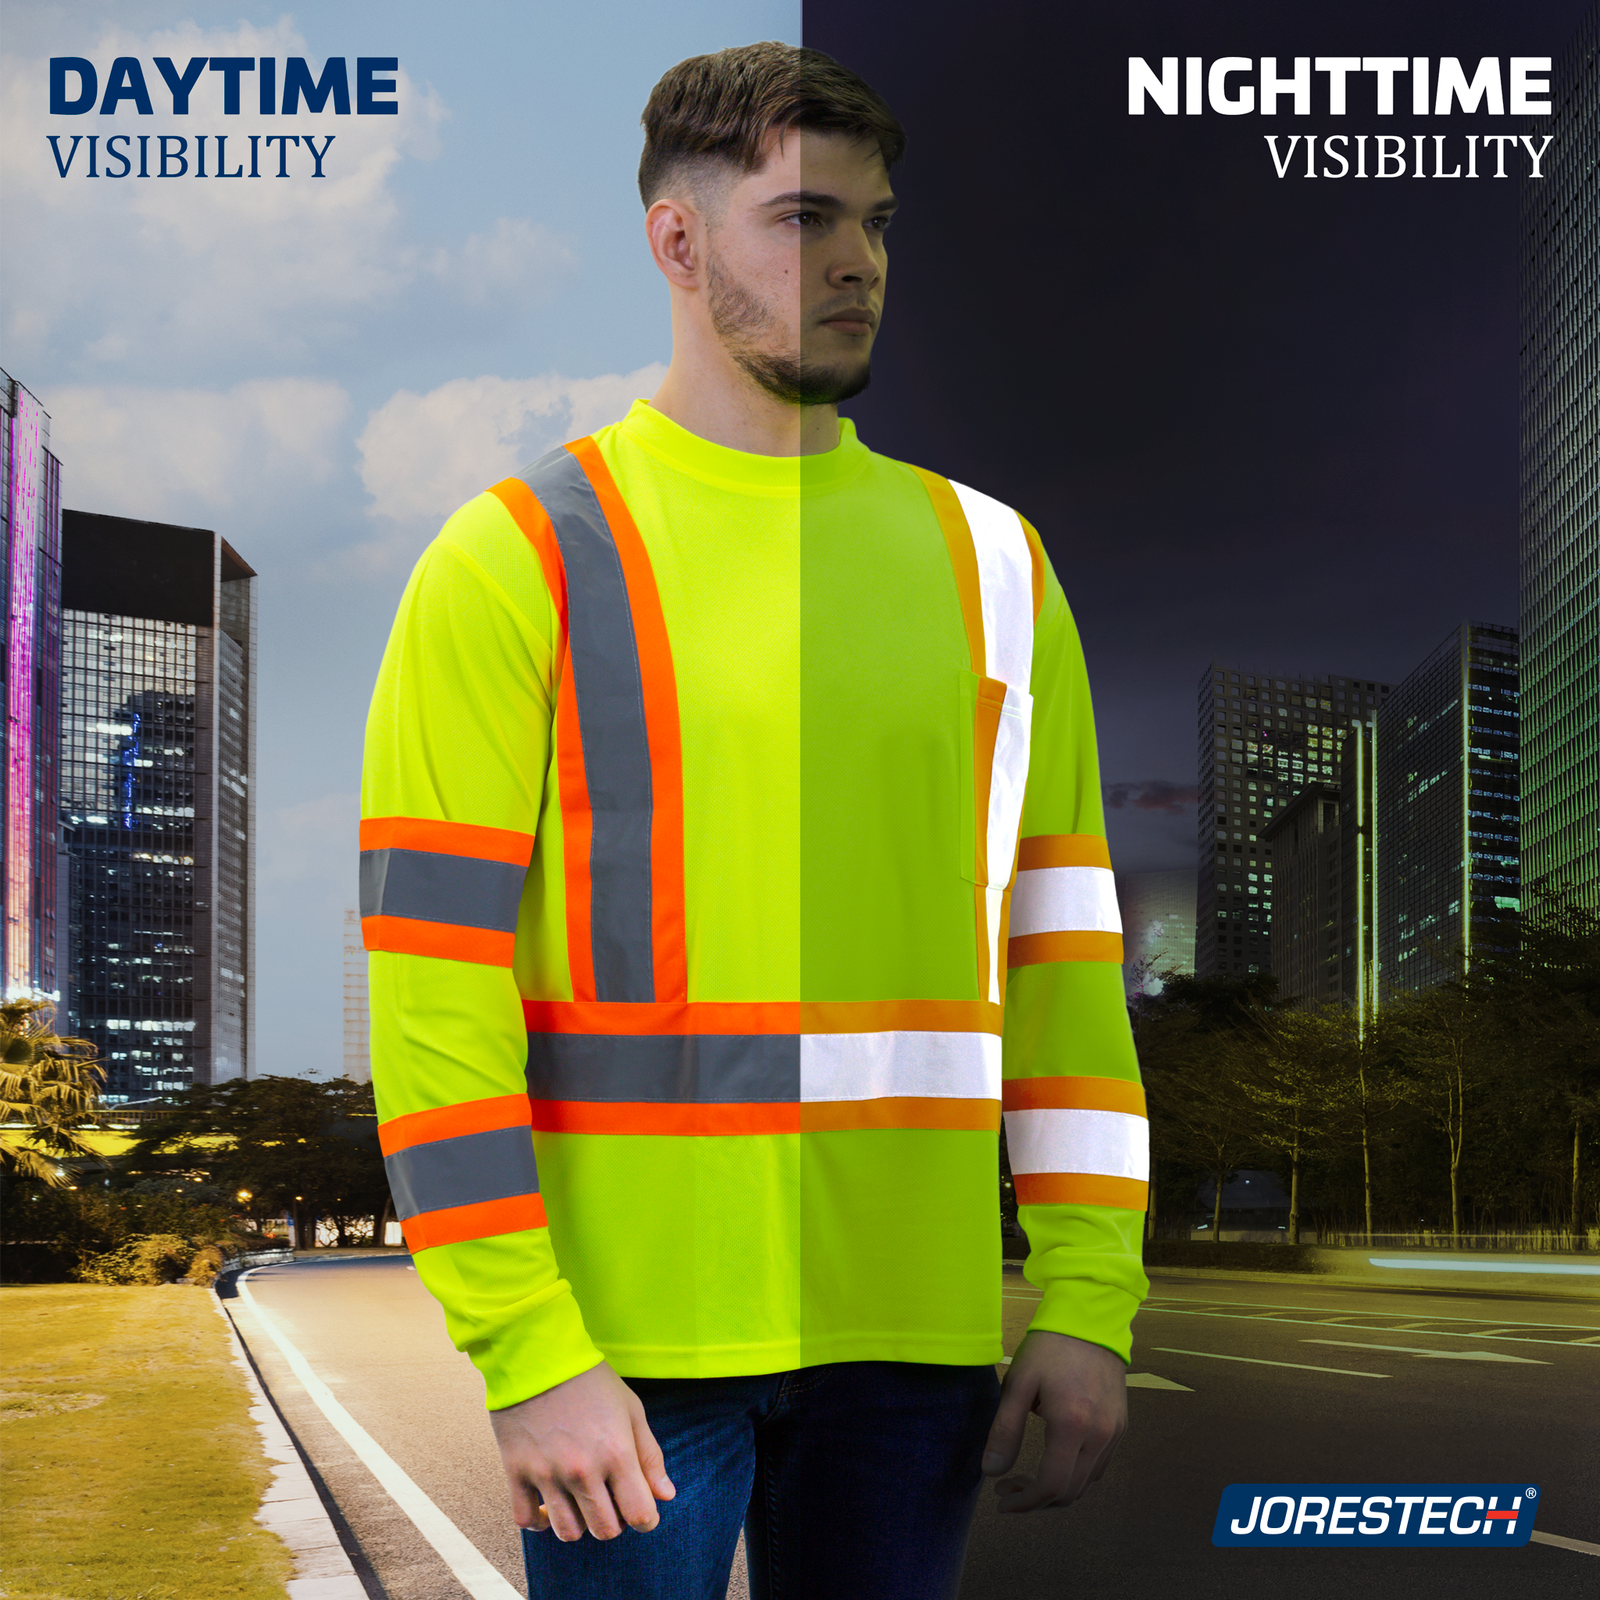 Worker on the road wearing the lime reflective safety shirt showing day and nighttime visibility